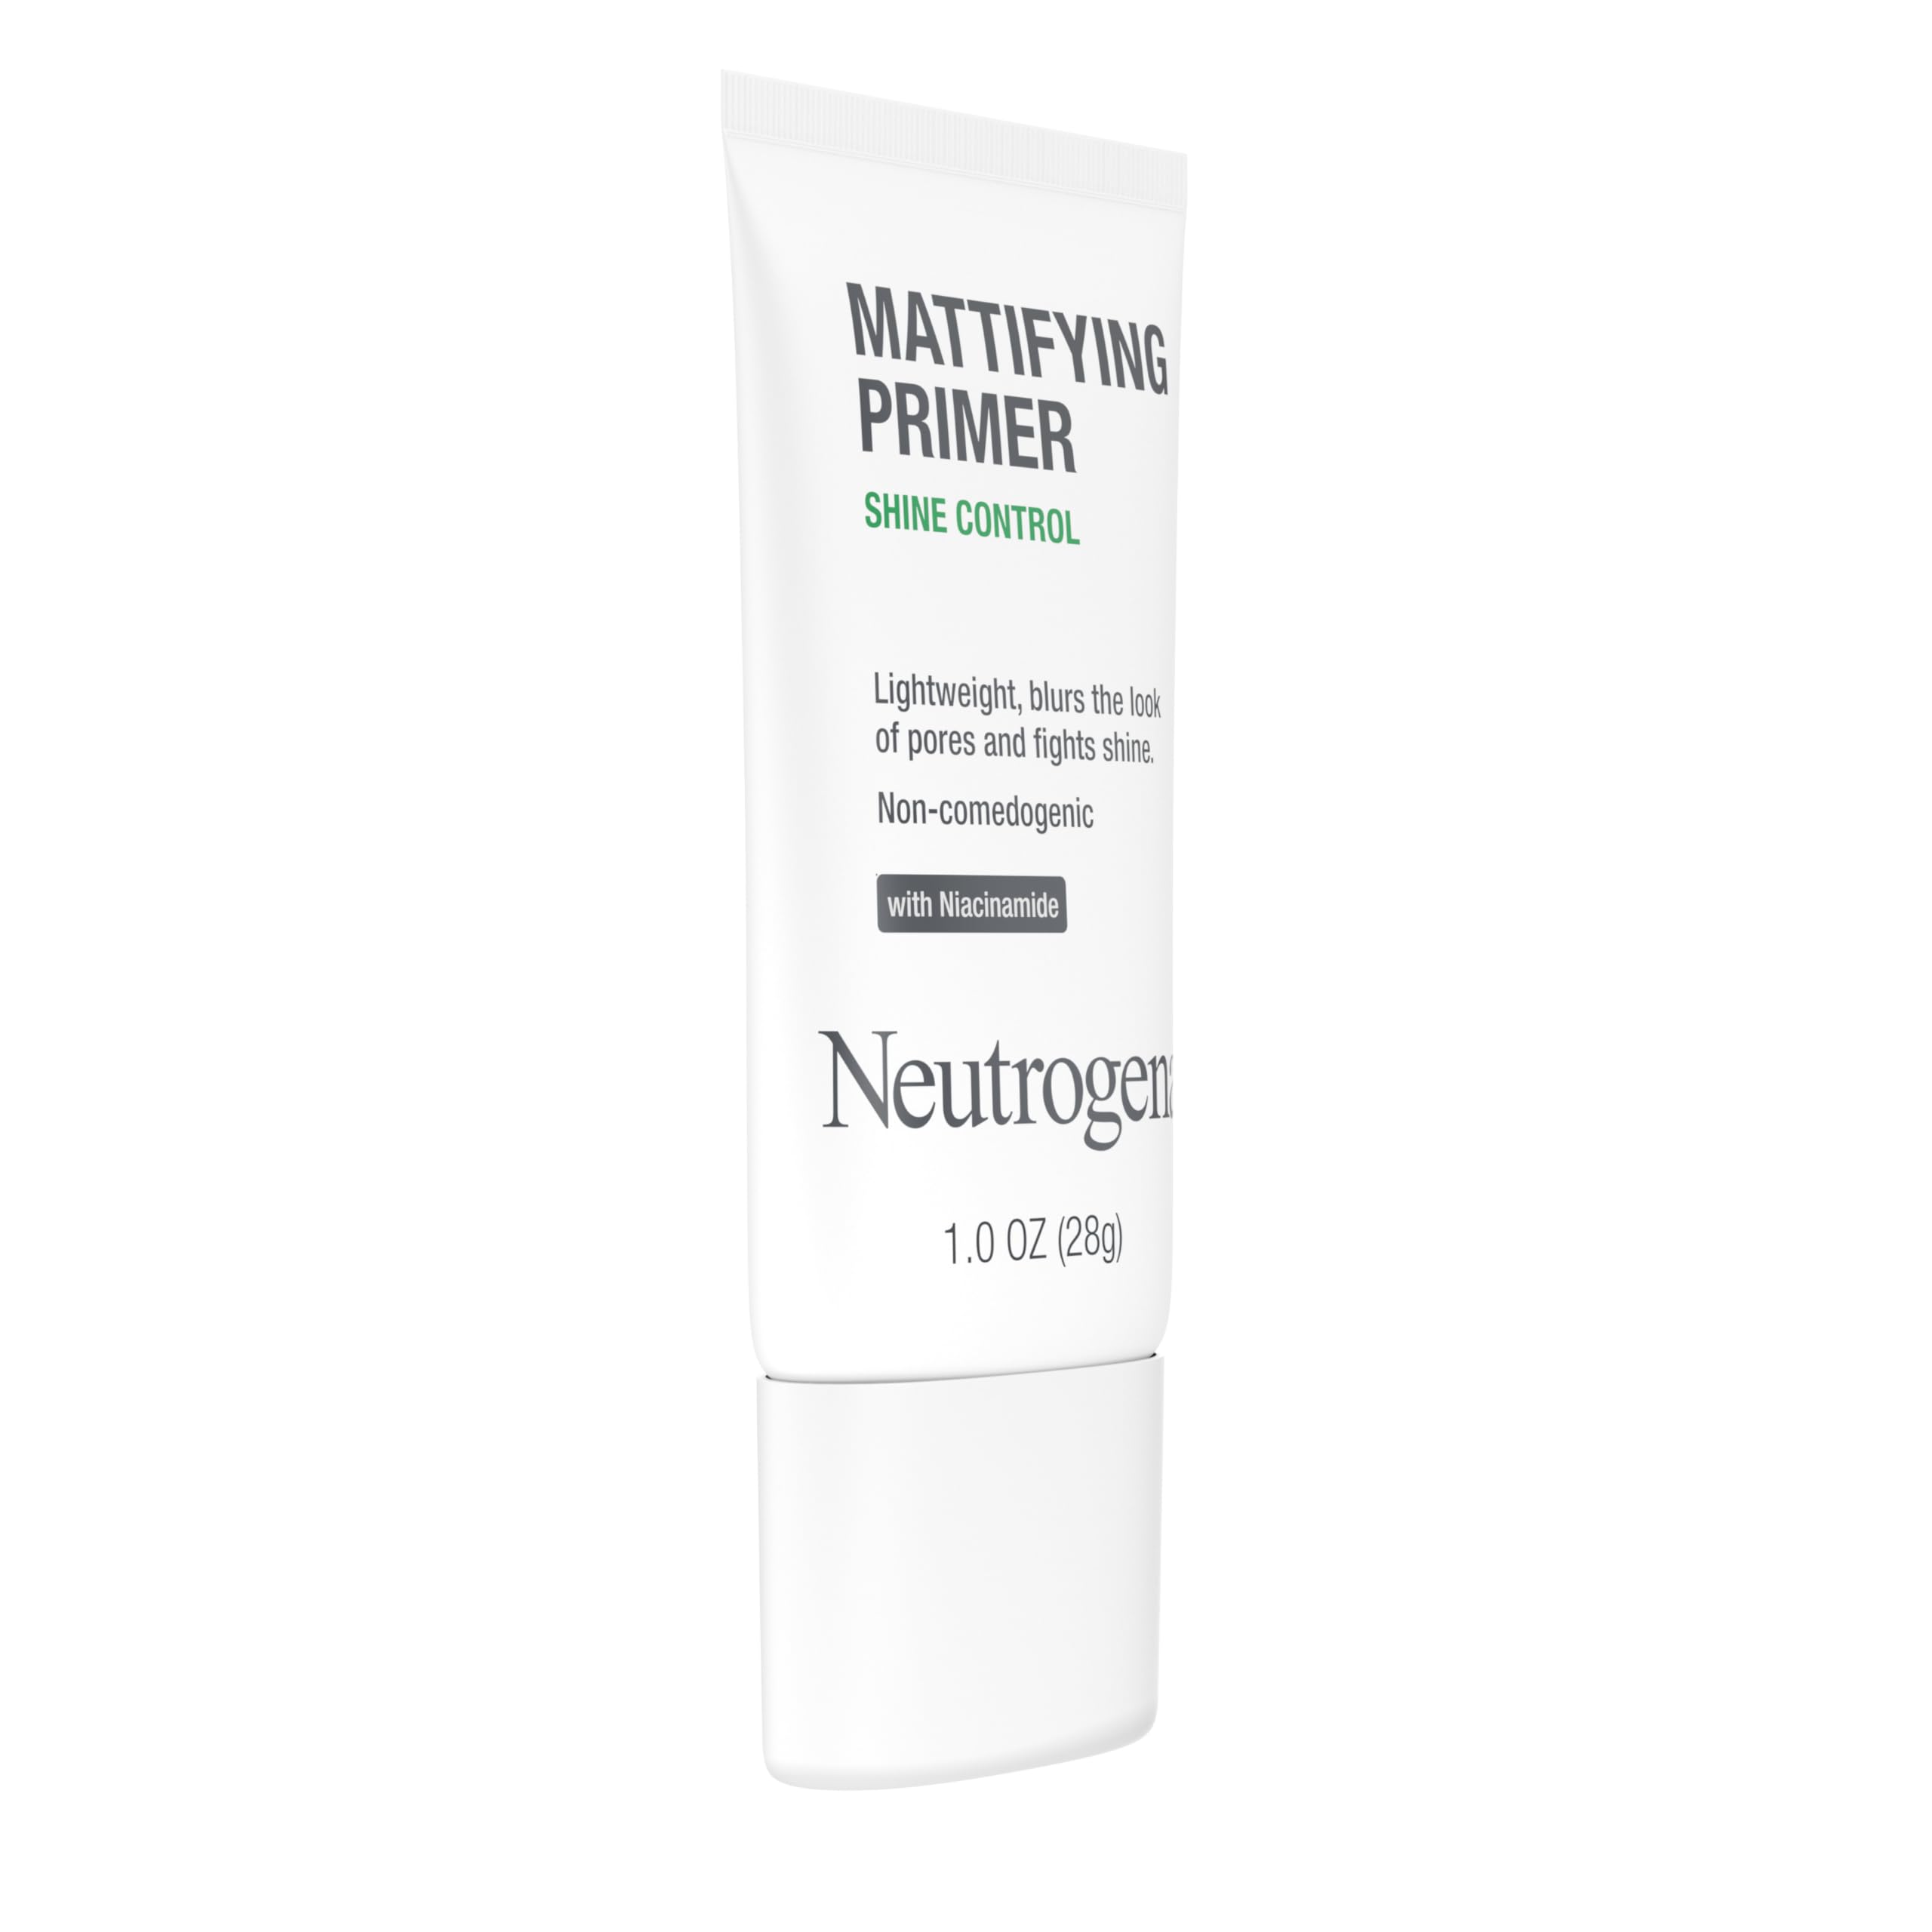 Neutrogena Mattifying Primer with Shine Control, Lightweight Pore Blurring Face Primer Blurs the Look of Pores & Helps Reduce Shine, Matte Primer with Niacinamide, 1 oz